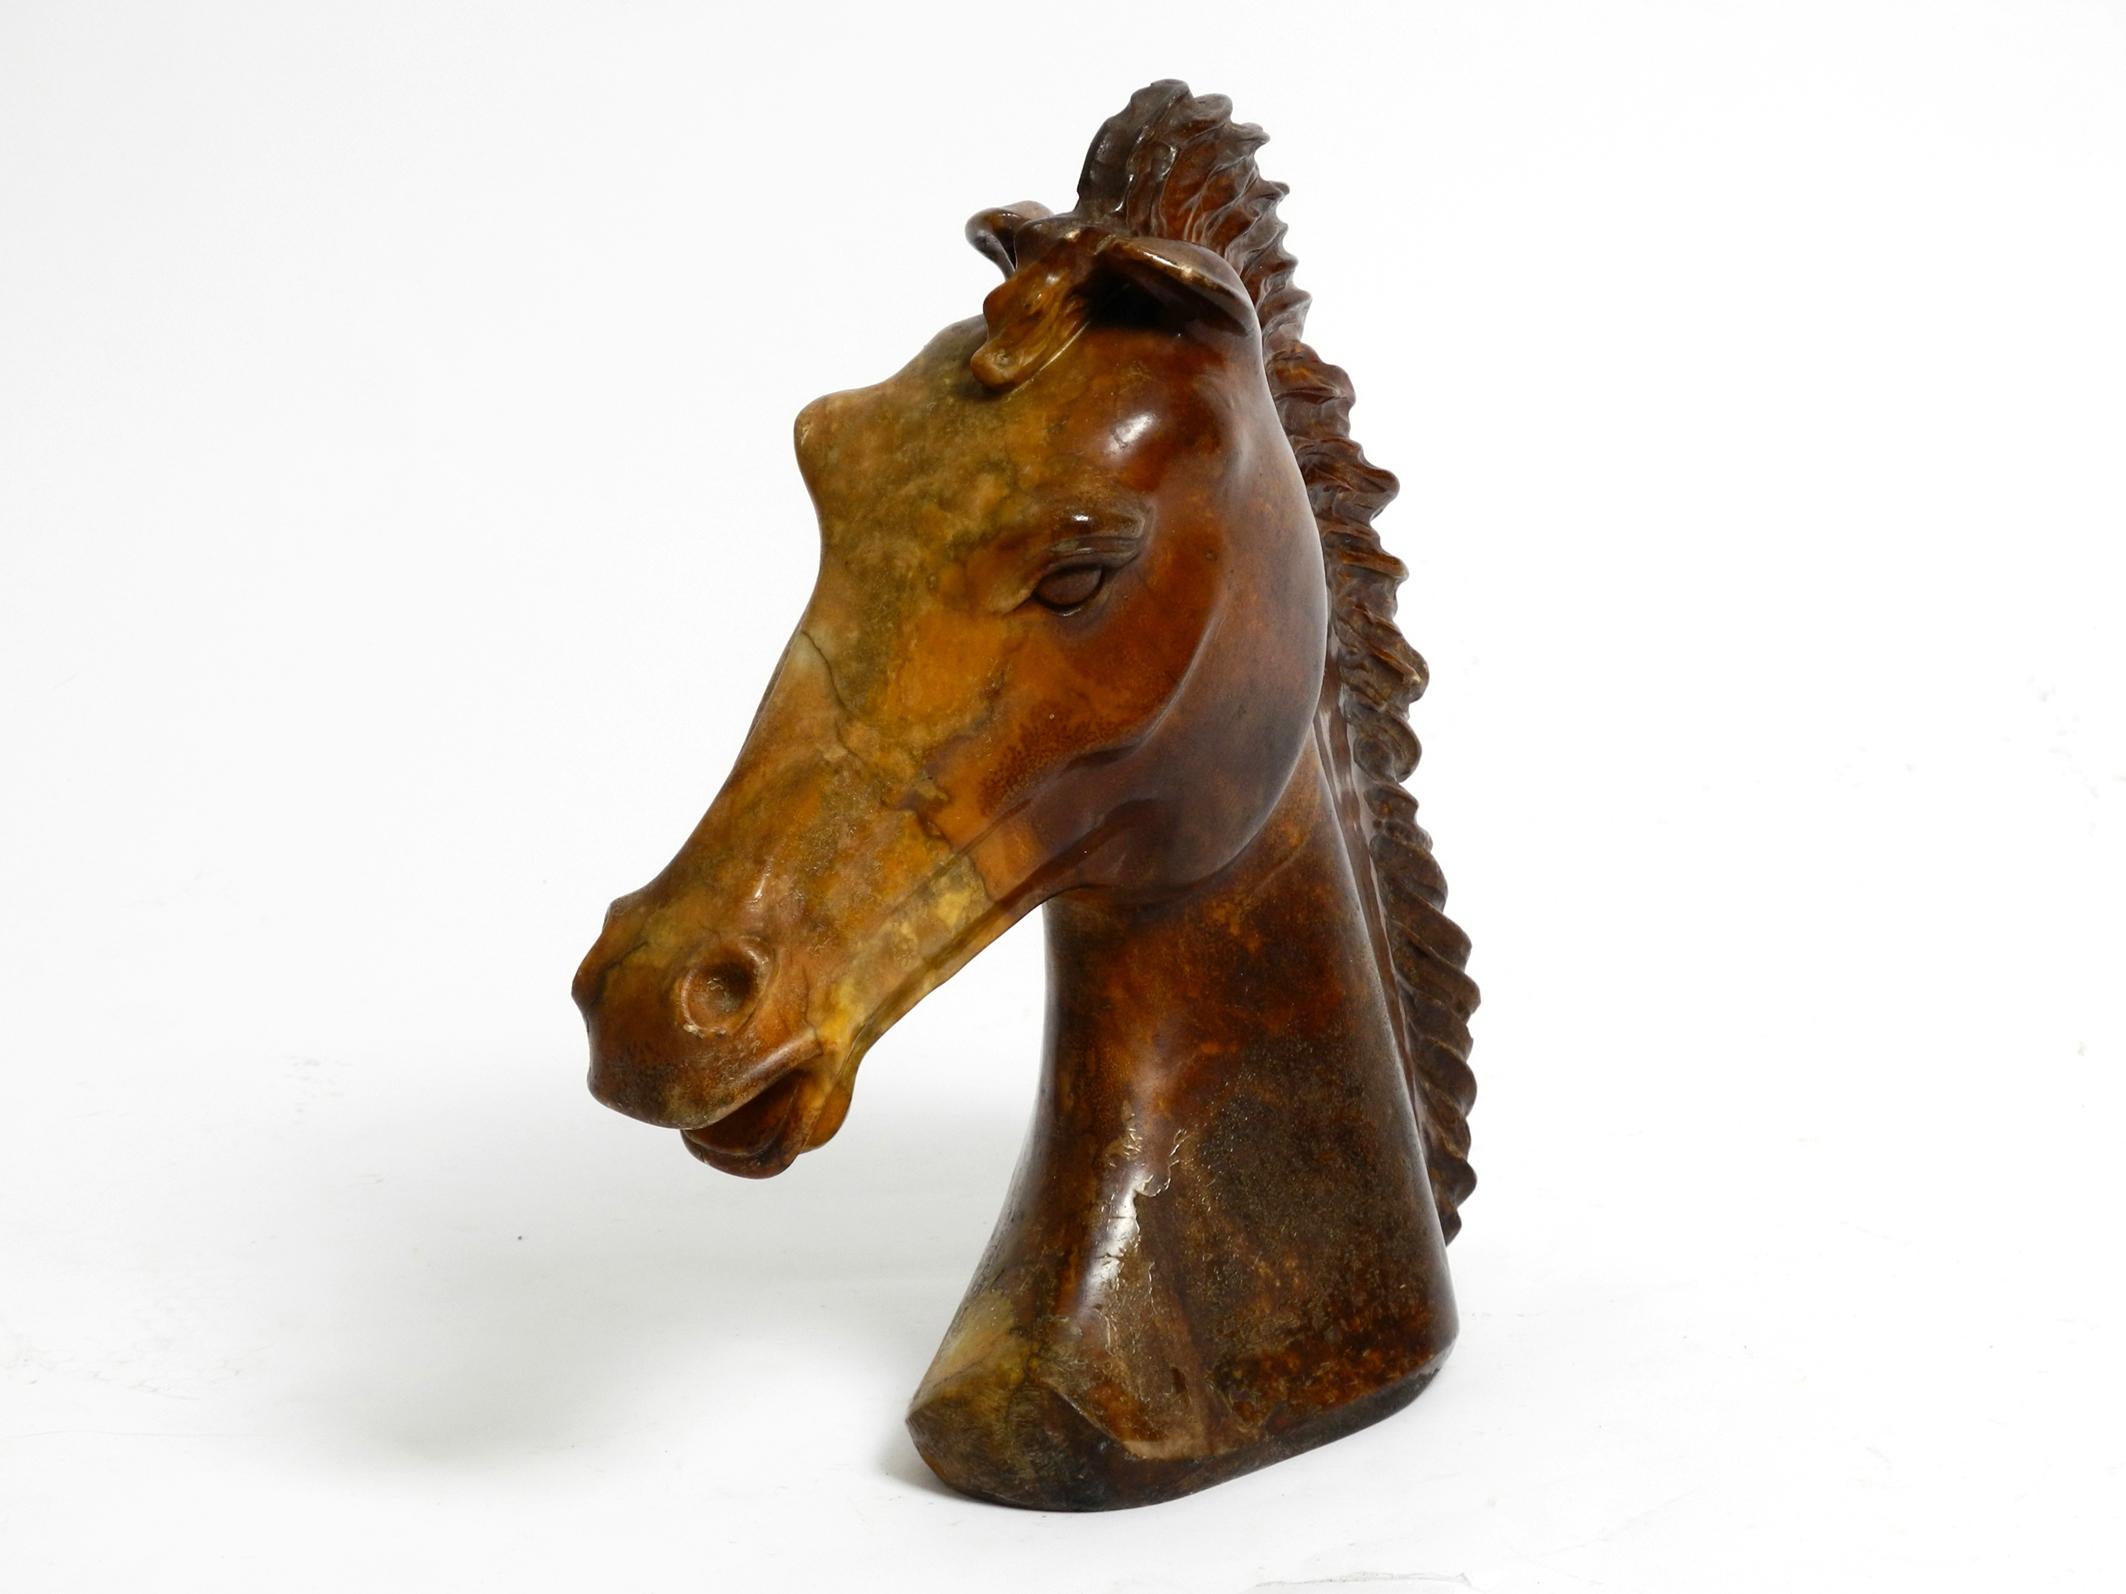 Very nice decorative large horse head sculpture made of brown soapstone.
Very heavy and lifelike with the typical soapstone grain.
Great color in dark brown and gradient in yellow.
Bought in the 1960s according to the previous owner.
Original